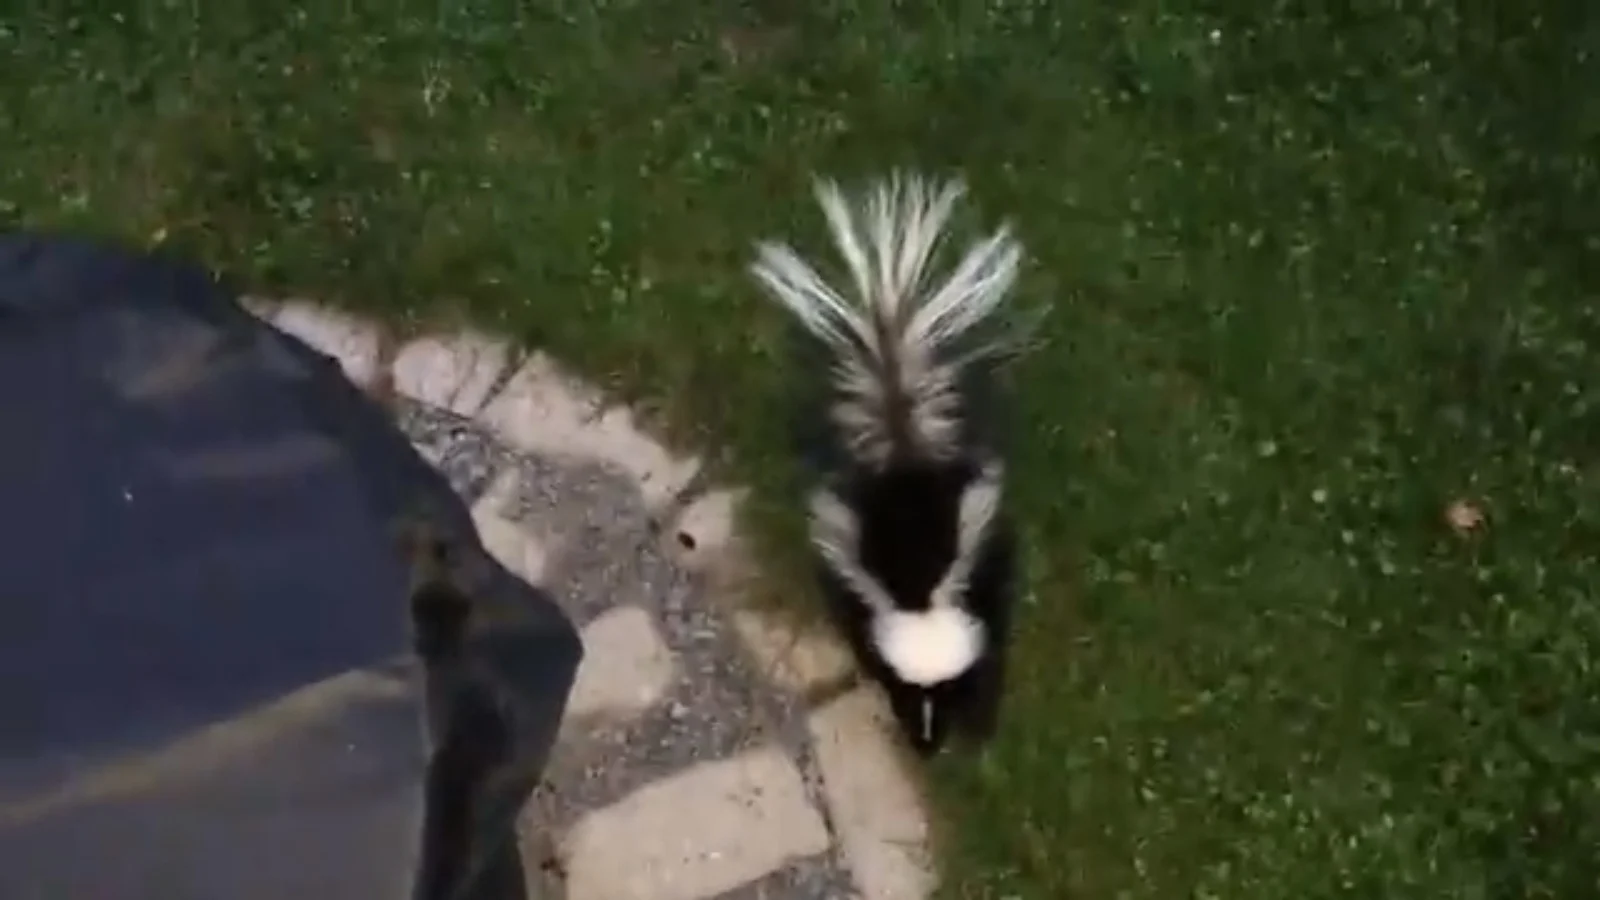 Watch for these skunk warning signs to avoid getting sprayed